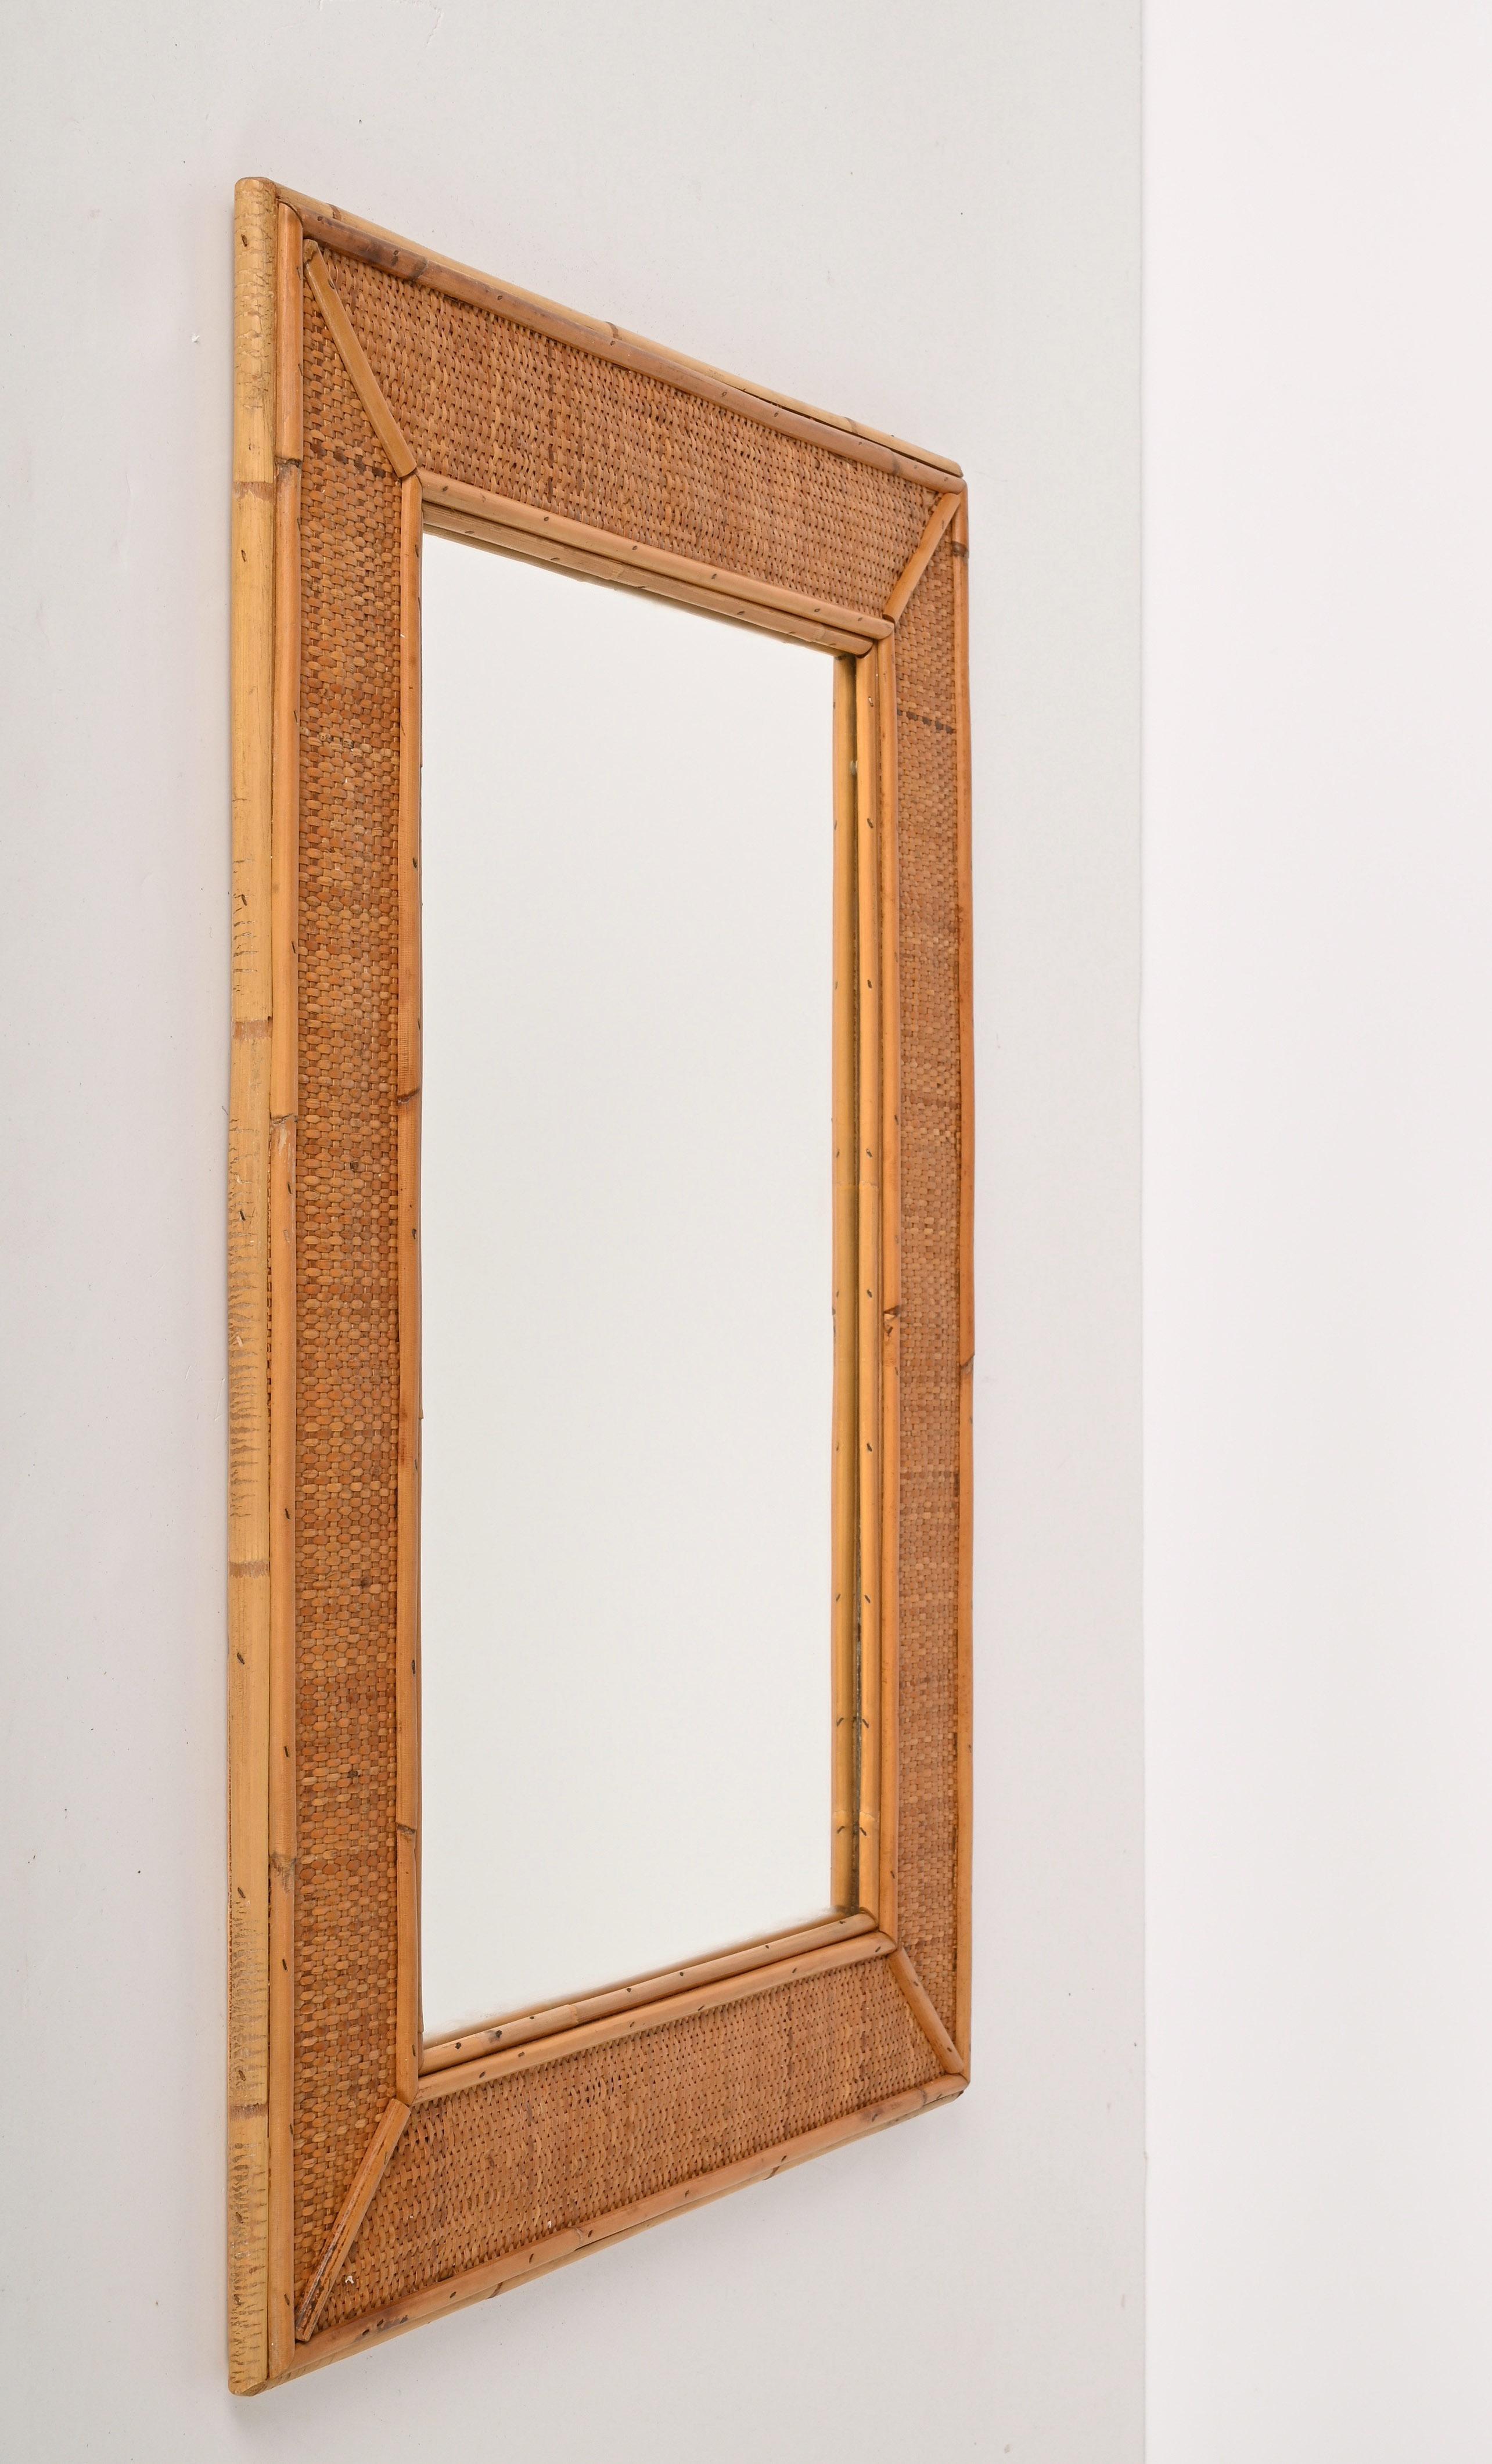 Midcentury Rectangular Italian Mirror with Bamboo and Woven Wicker Frame, 1970s For Sale 4